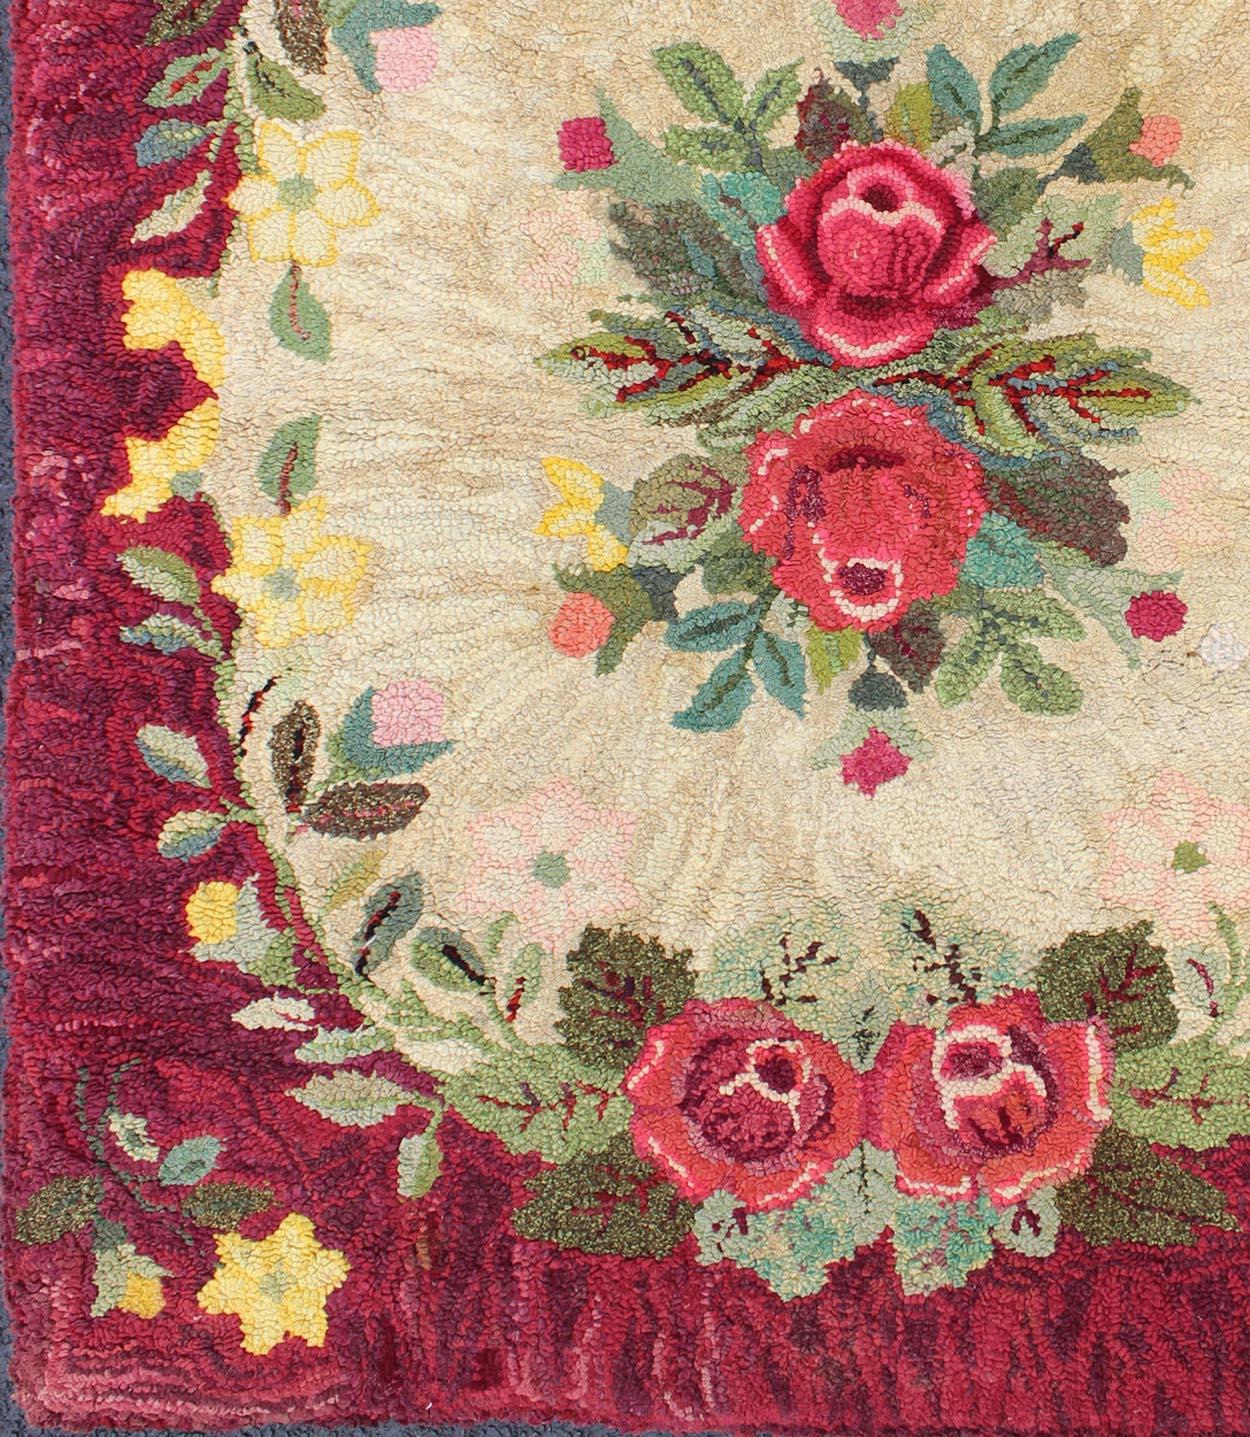 Vintage American Hooked rug with red rose and yellow flower bouquets, rug j10-1202, country of origin / type: United States / Hooked, circa 1930

This antique American Hooked rug depicts beautiful floral arrangements/bouquets placed within a